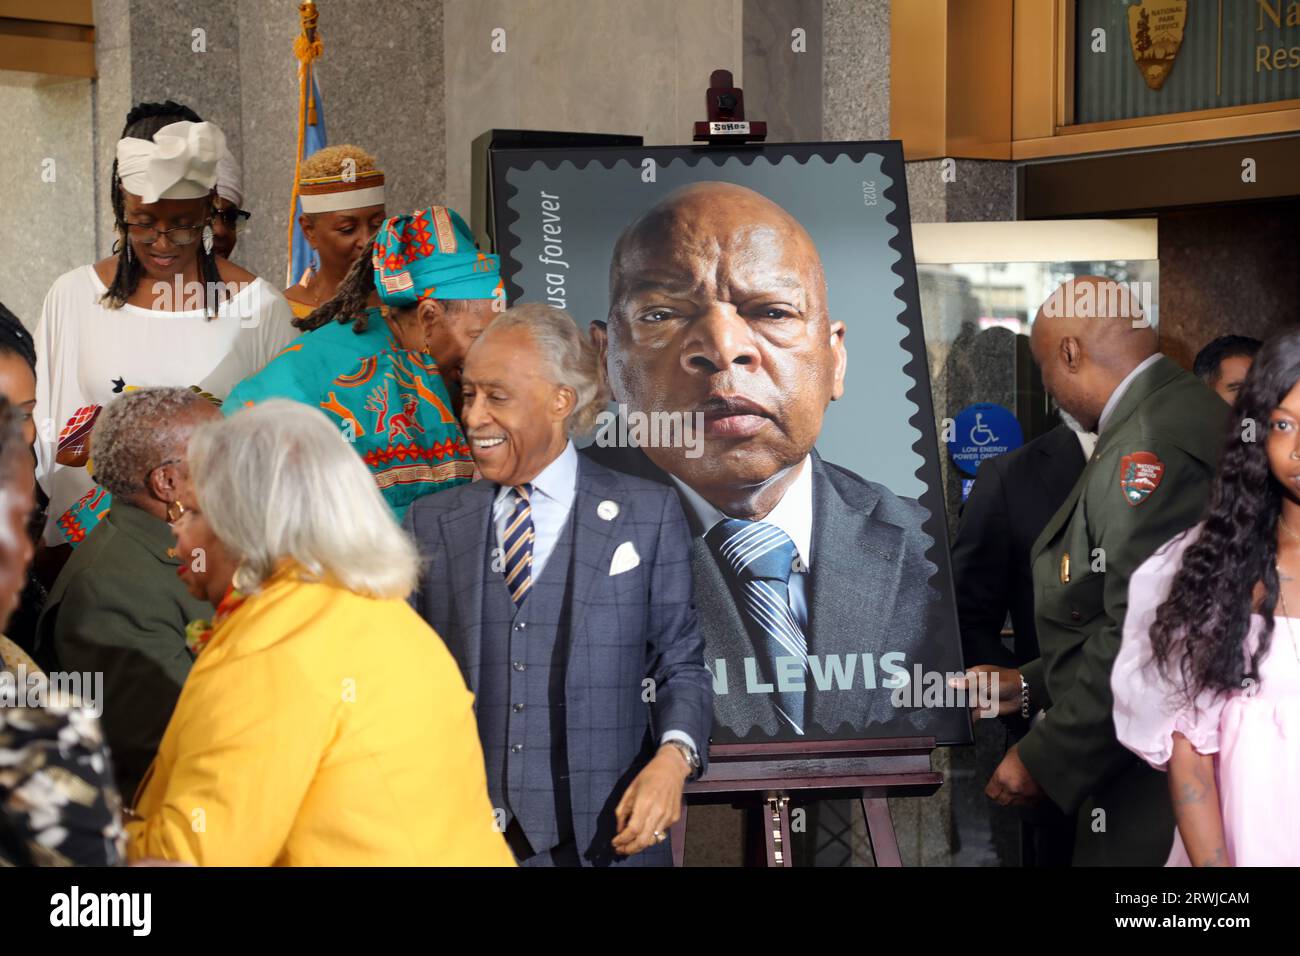 NEW YORK, NEW YORK- SEPTEMBER 19: (L-R) Laurie Cumbo, Rev. Al Sharpton, New York City Mayor Eric Adams, Jasmine Muhammad and others attend the John Lewis Stamp Unveiling held at the African Burial Grounds on September 19, 2023 in New York City. Chris Moore/MediaPunch Stock Photo